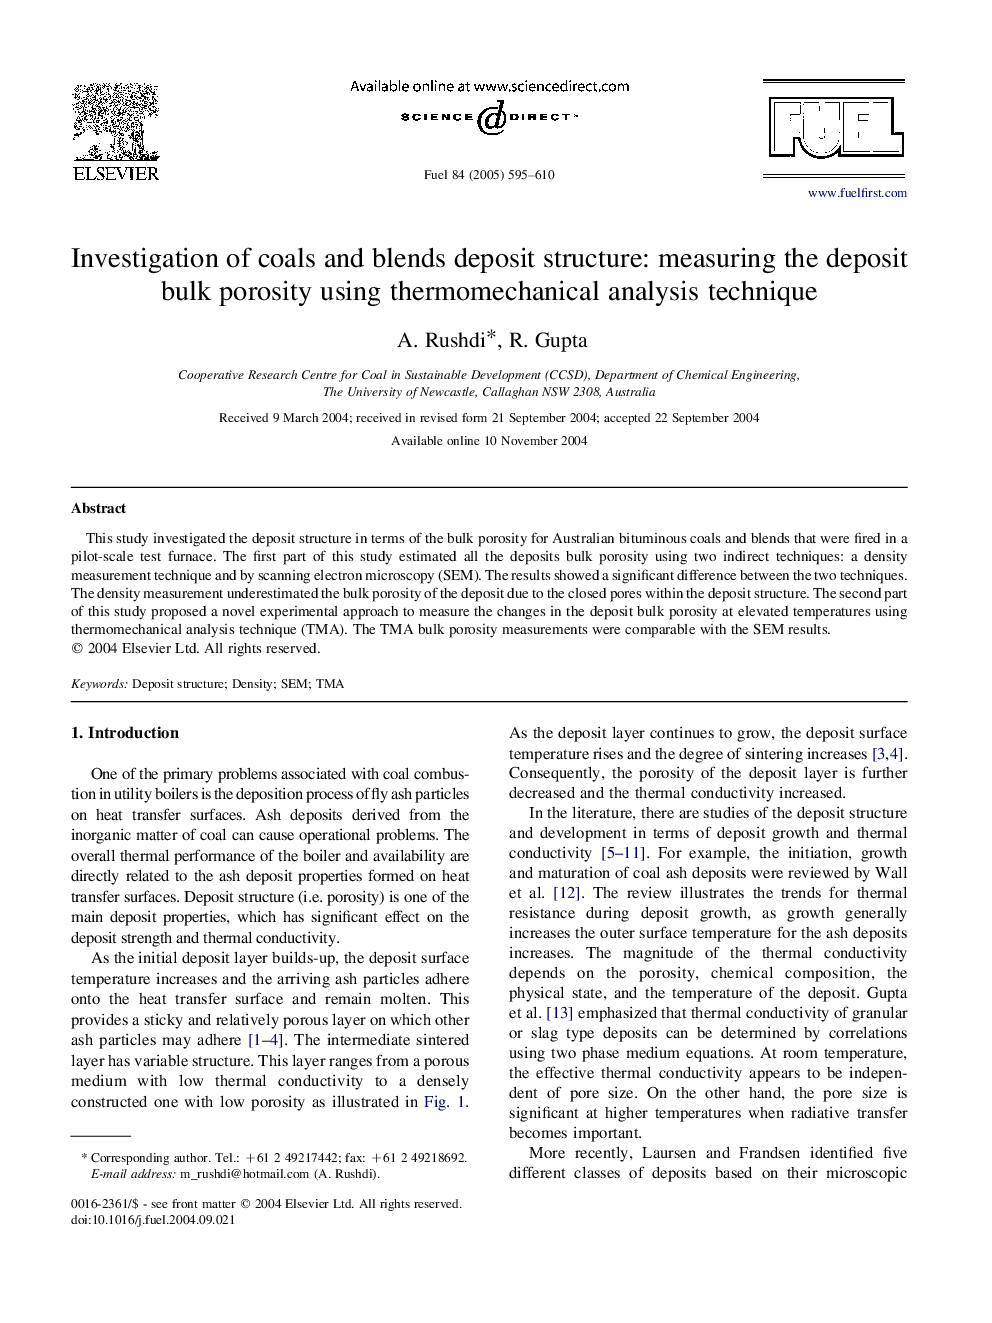 Investigation of coals and blends deposit structure: measuring the deposit bulk porosity using thermomechanical analysis technique